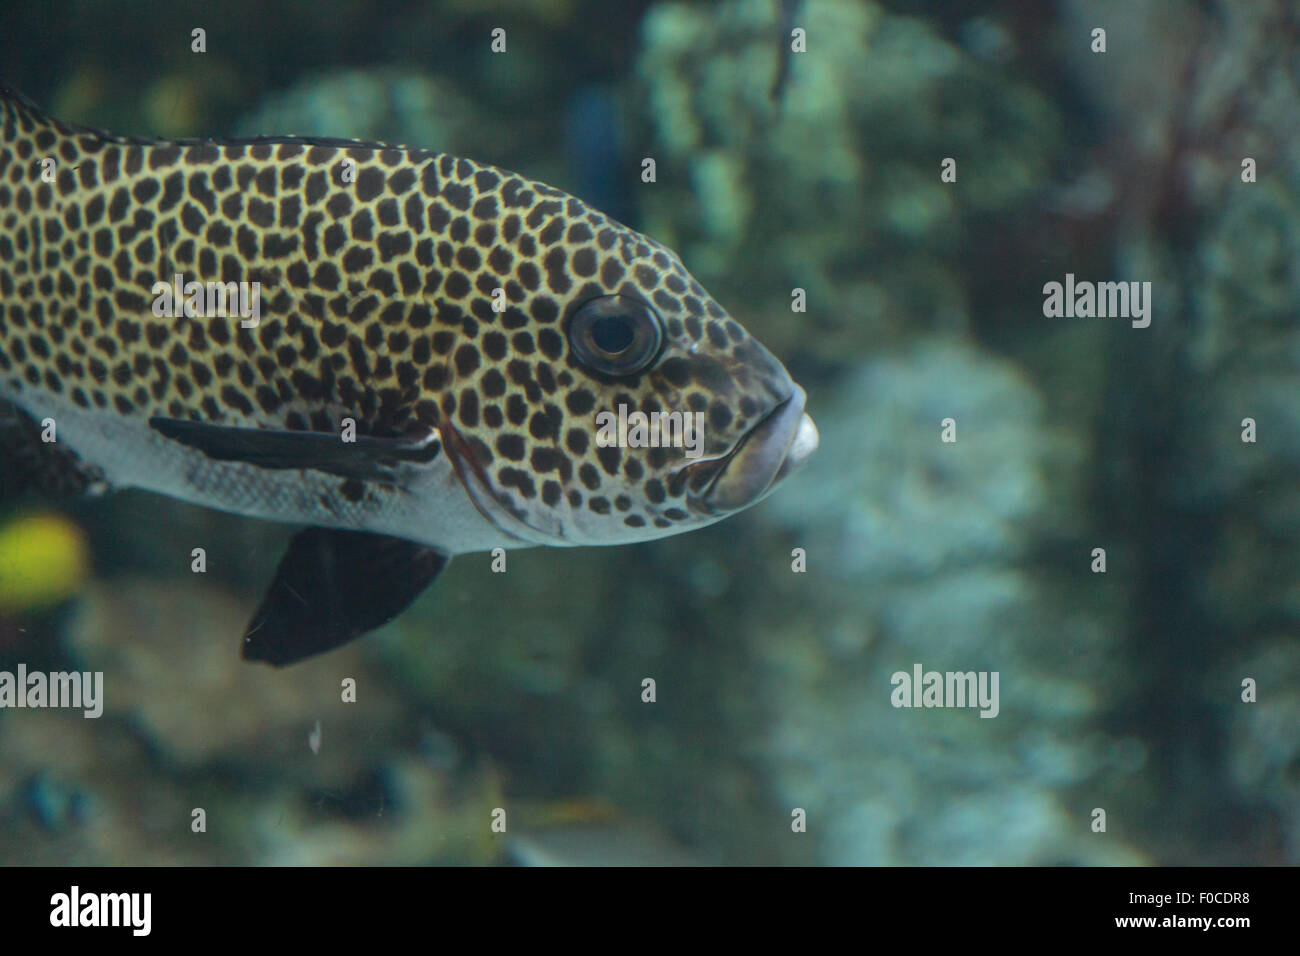 Spotted leopard fish swims on a reef in the ocean Stock Photo